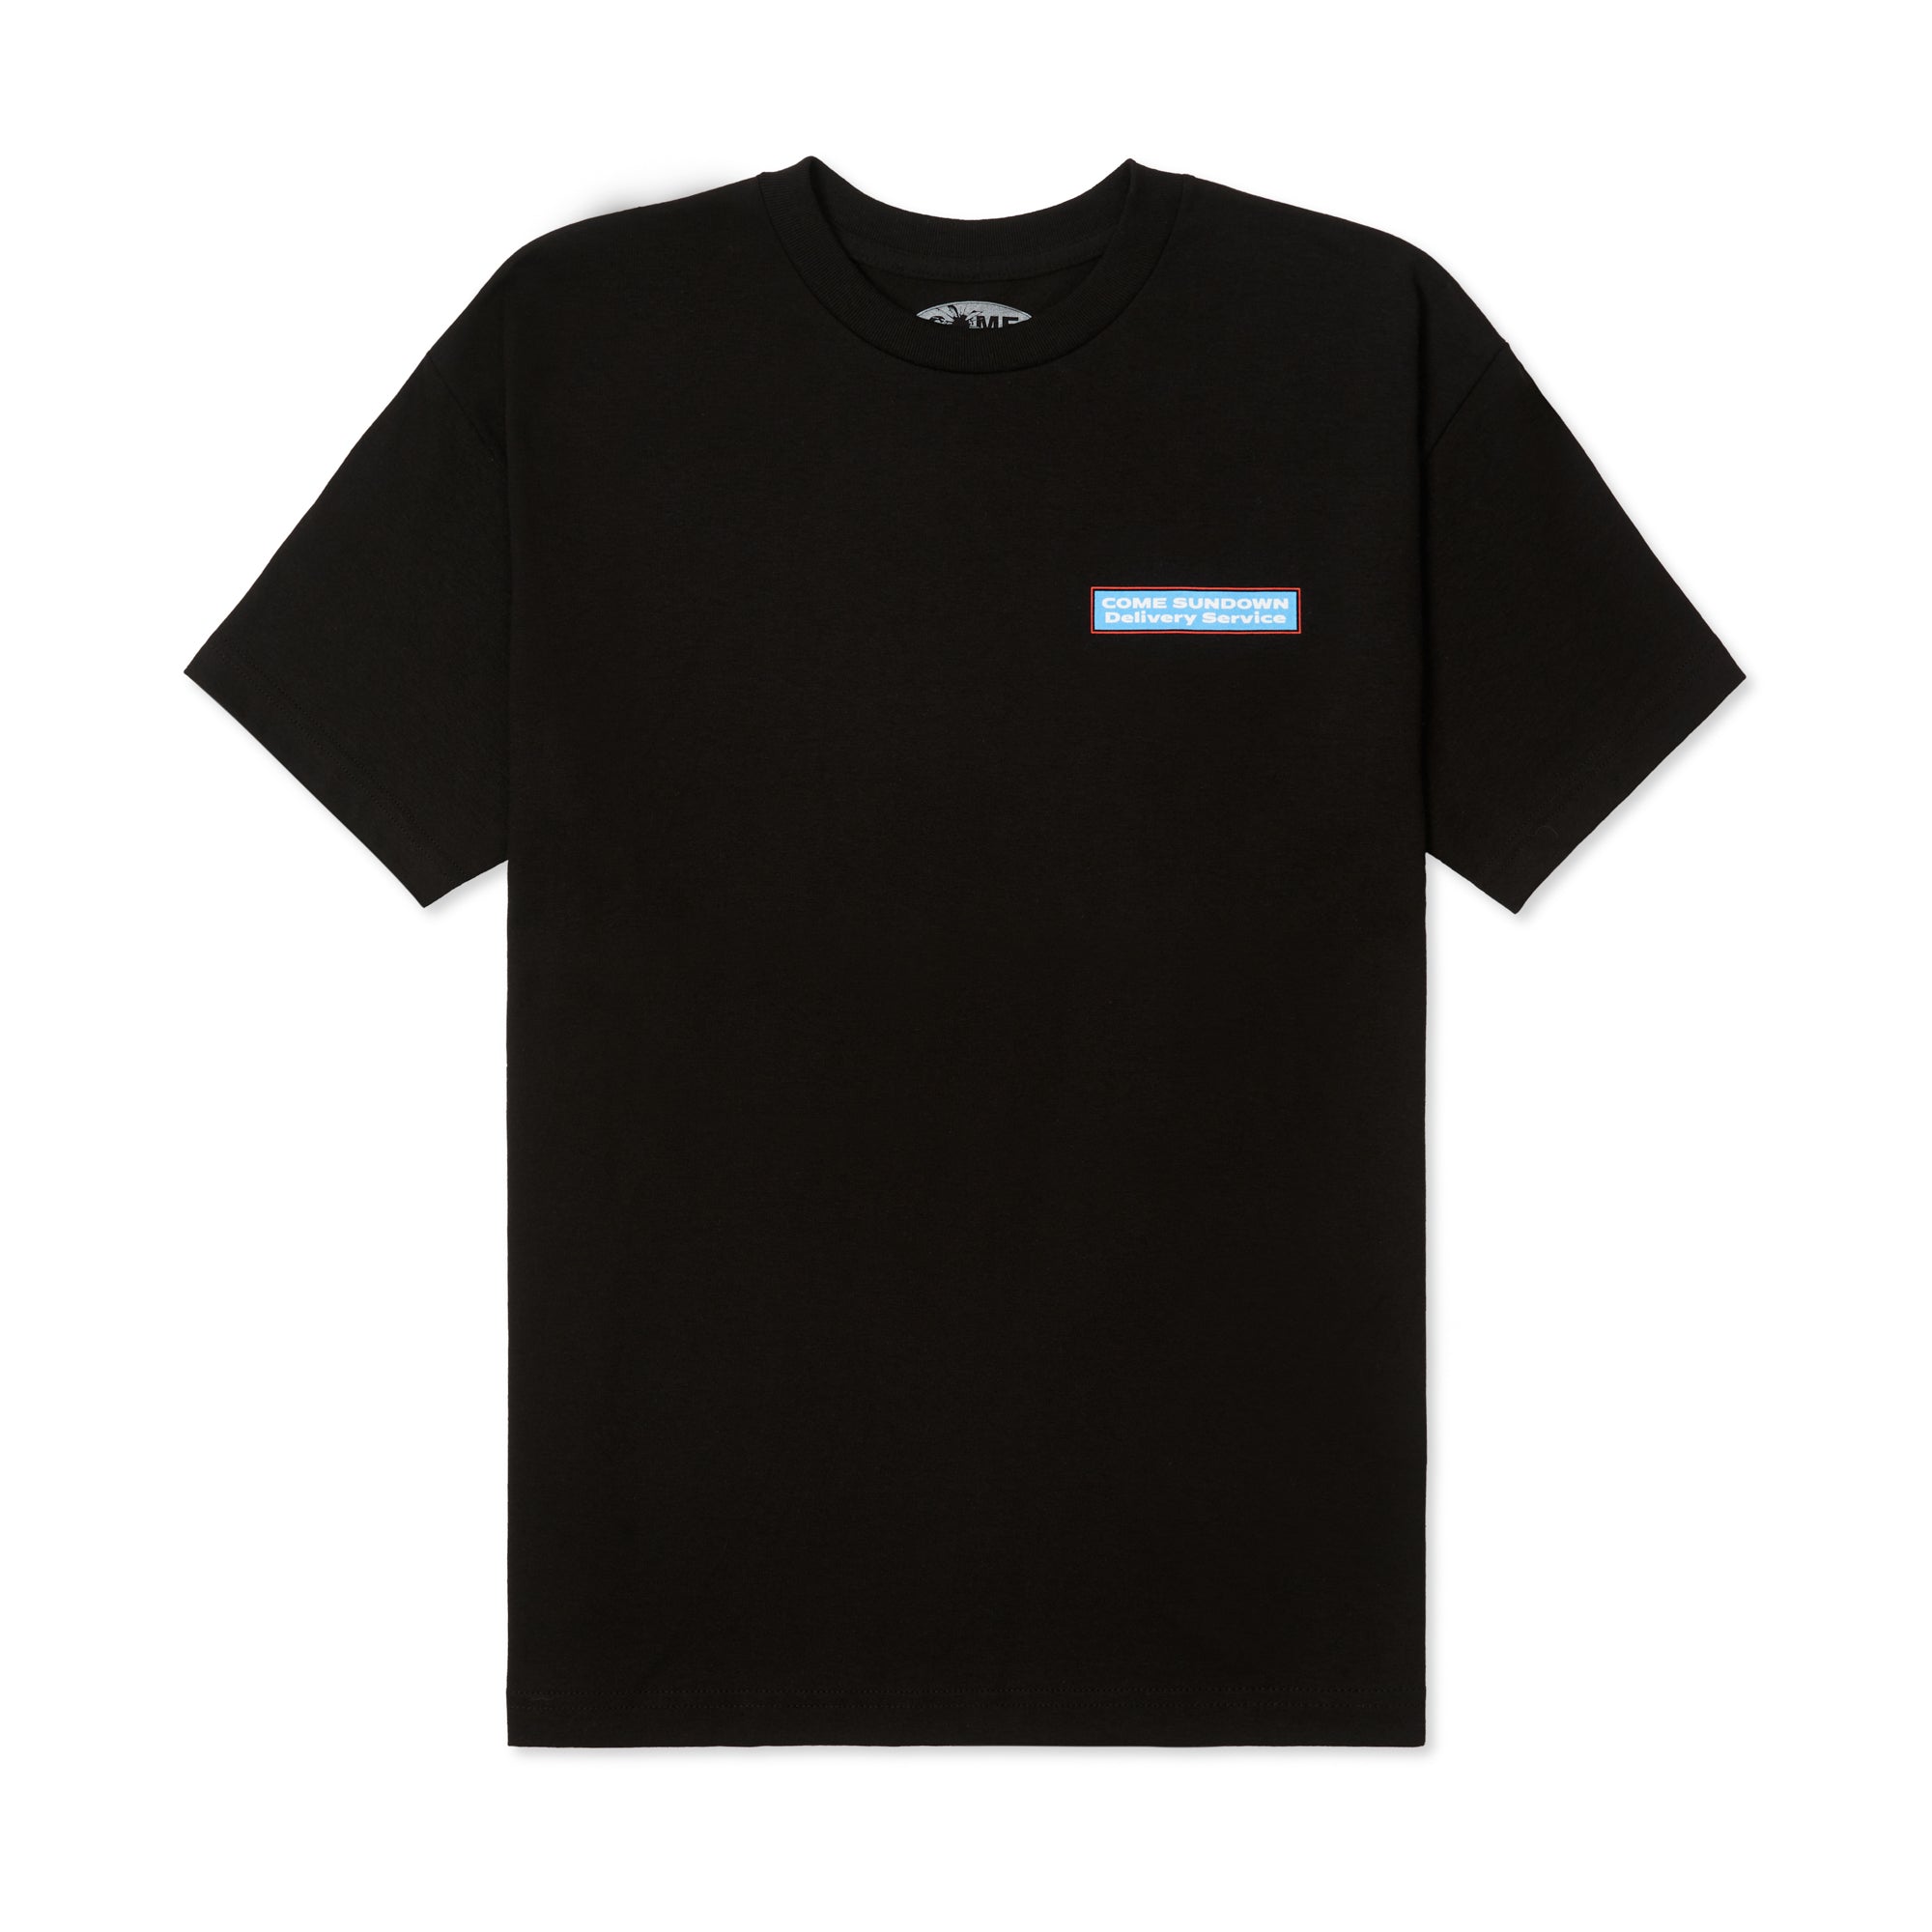 Delivery Tee, Black